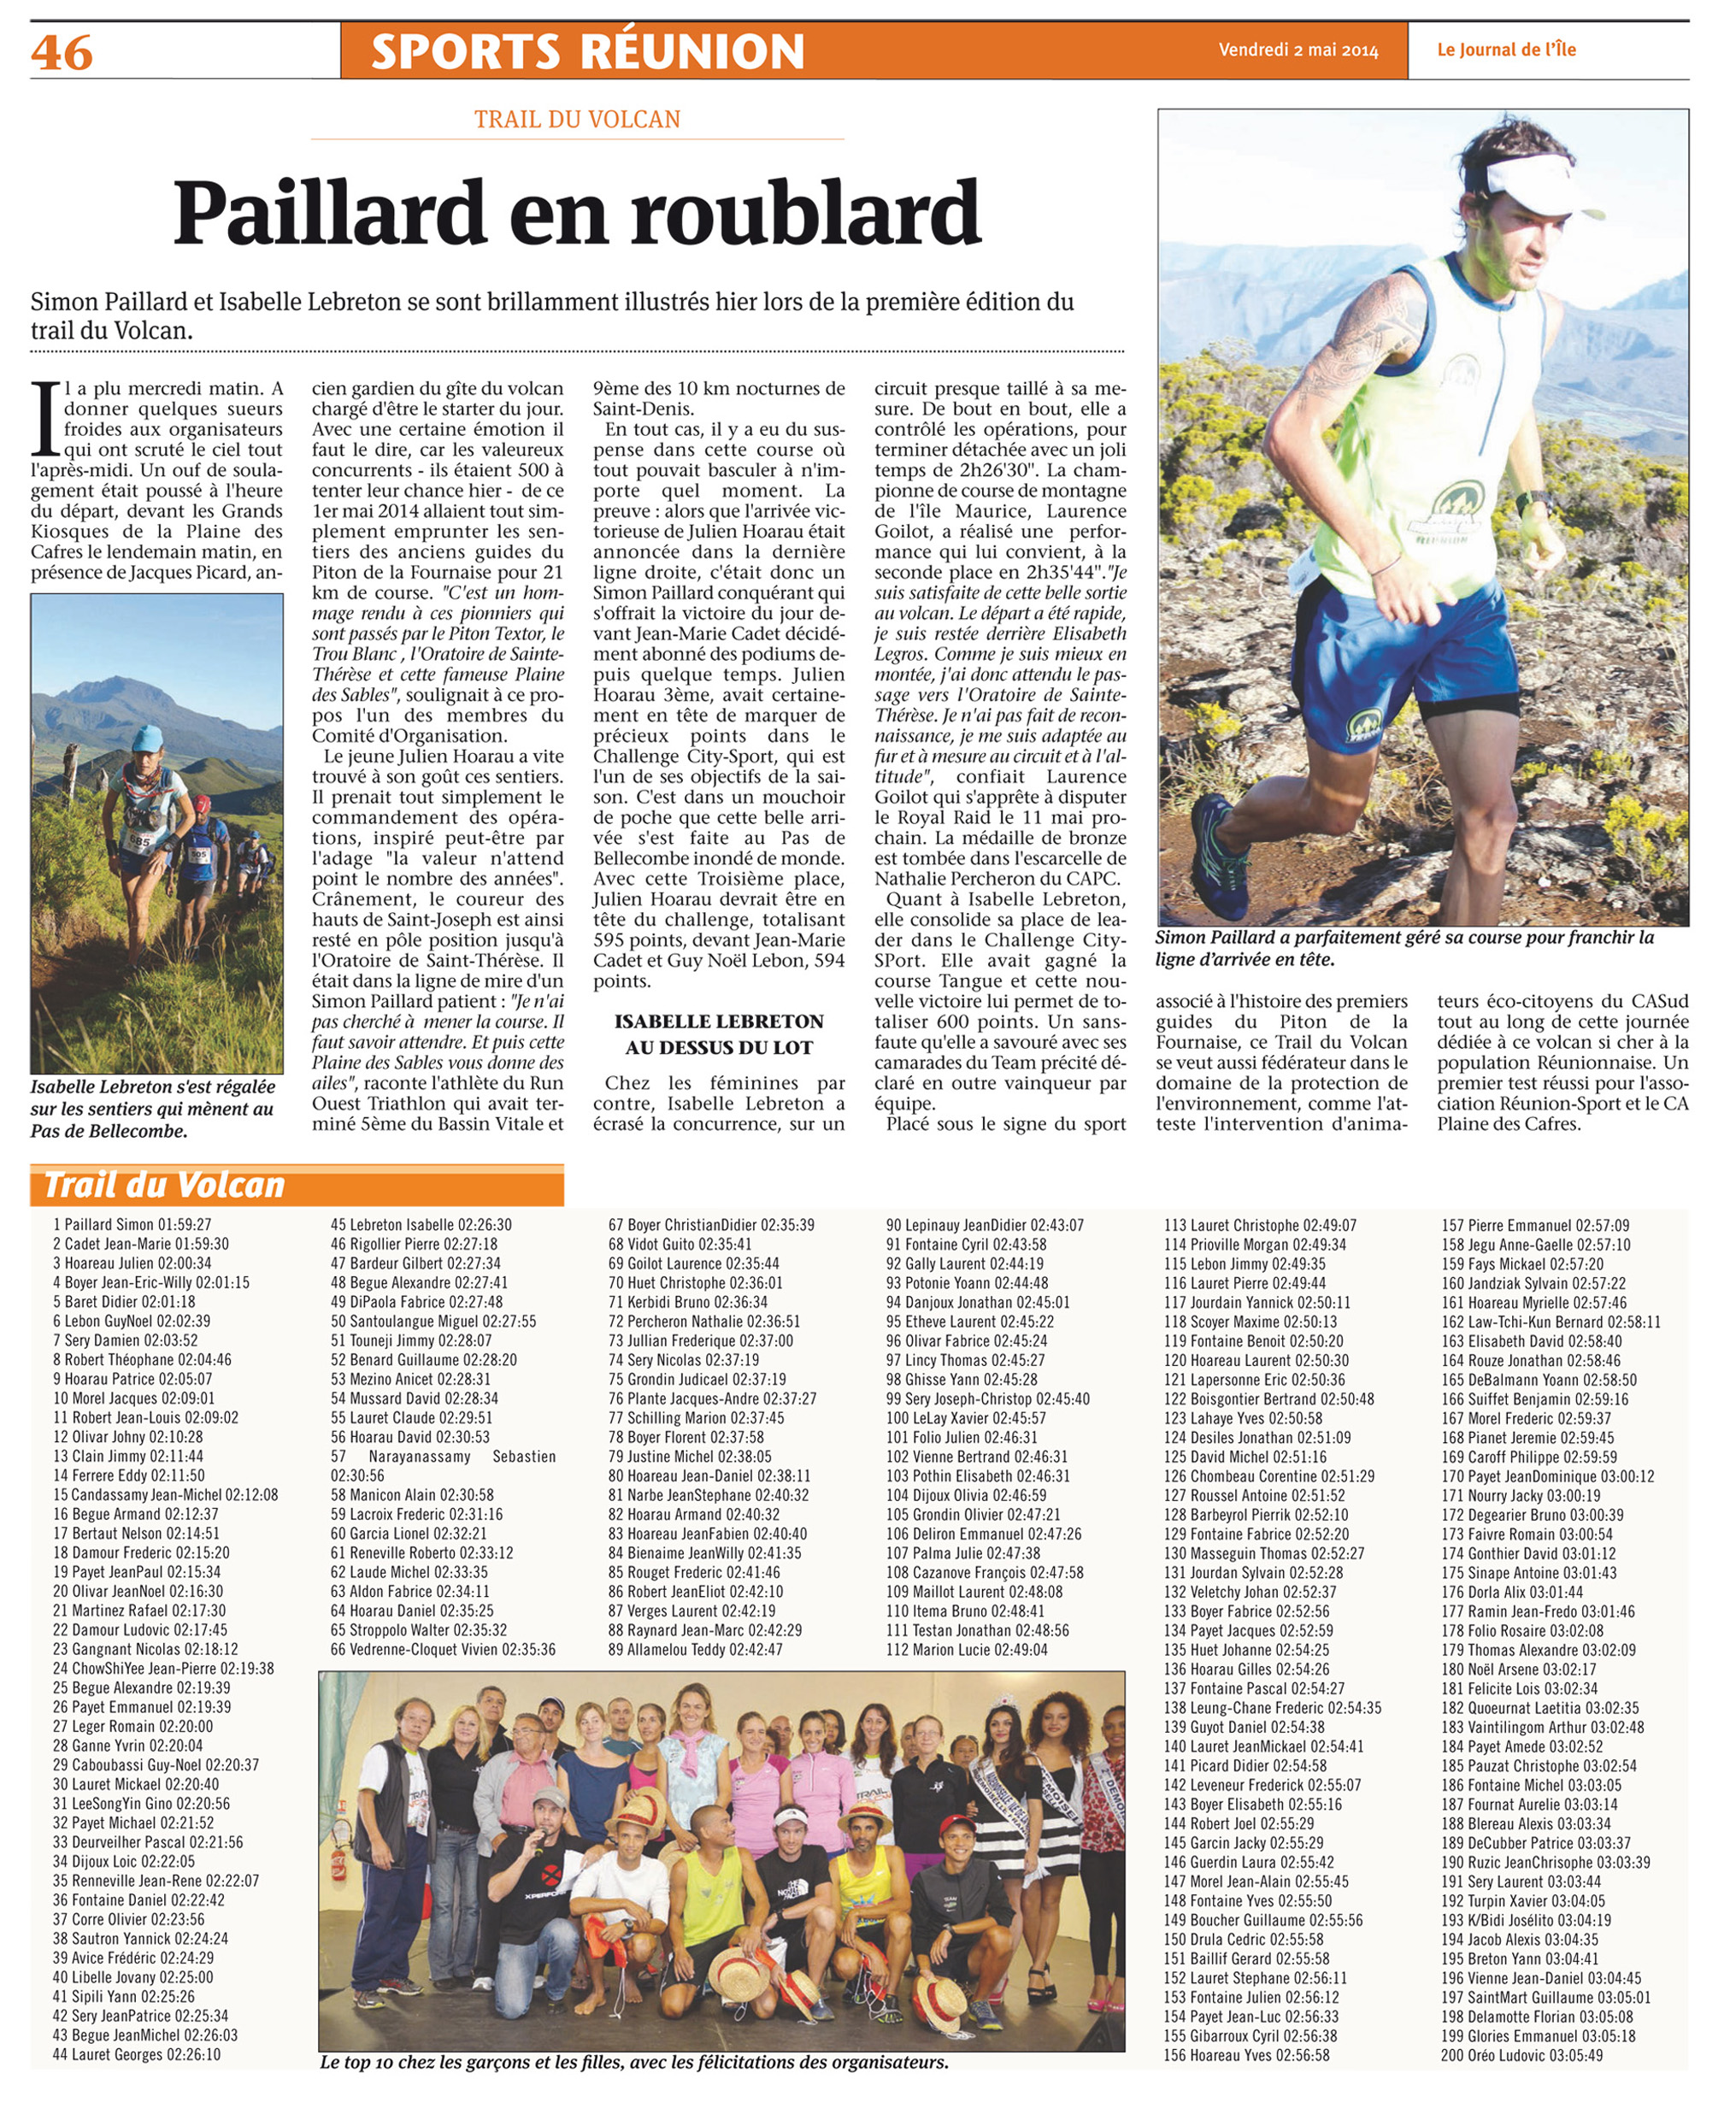 Trail du Volcan 2020: on marque le coup...